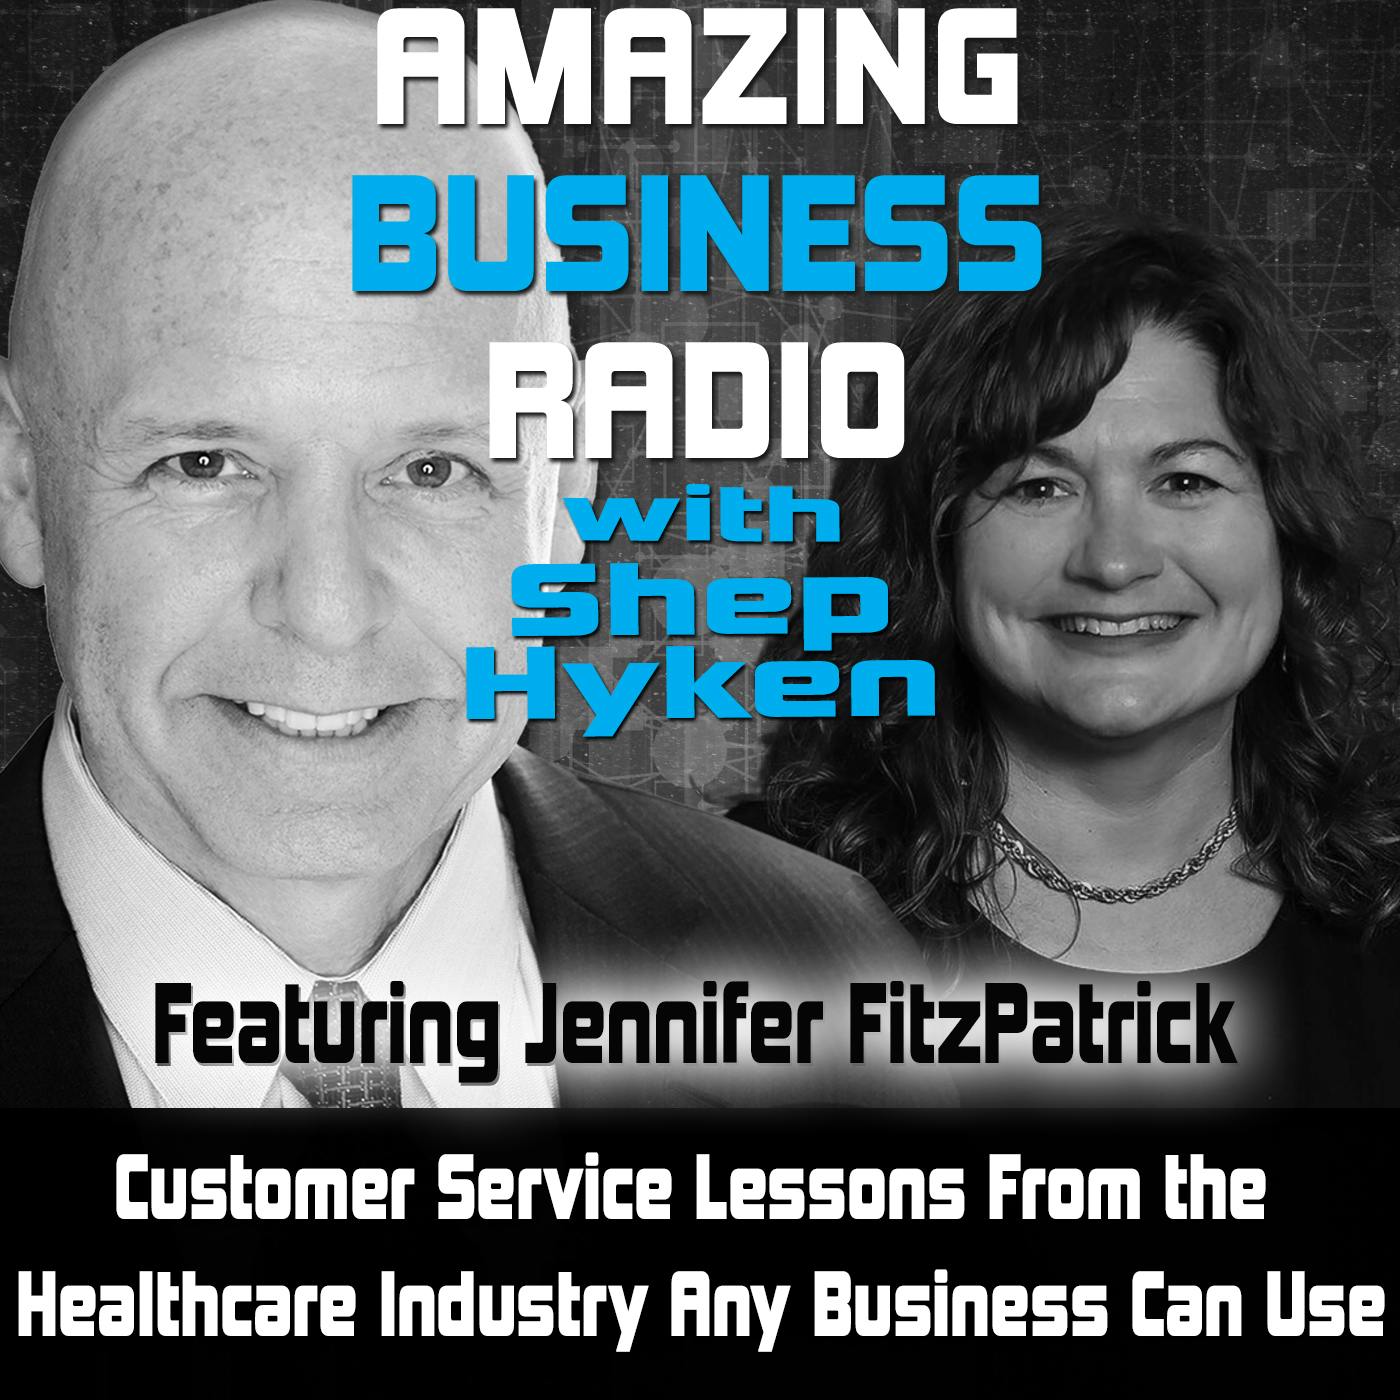 Customer Service Lessons From the Healthcare Industry Any Business Can Use Featuring Jennifer FitzPatrick